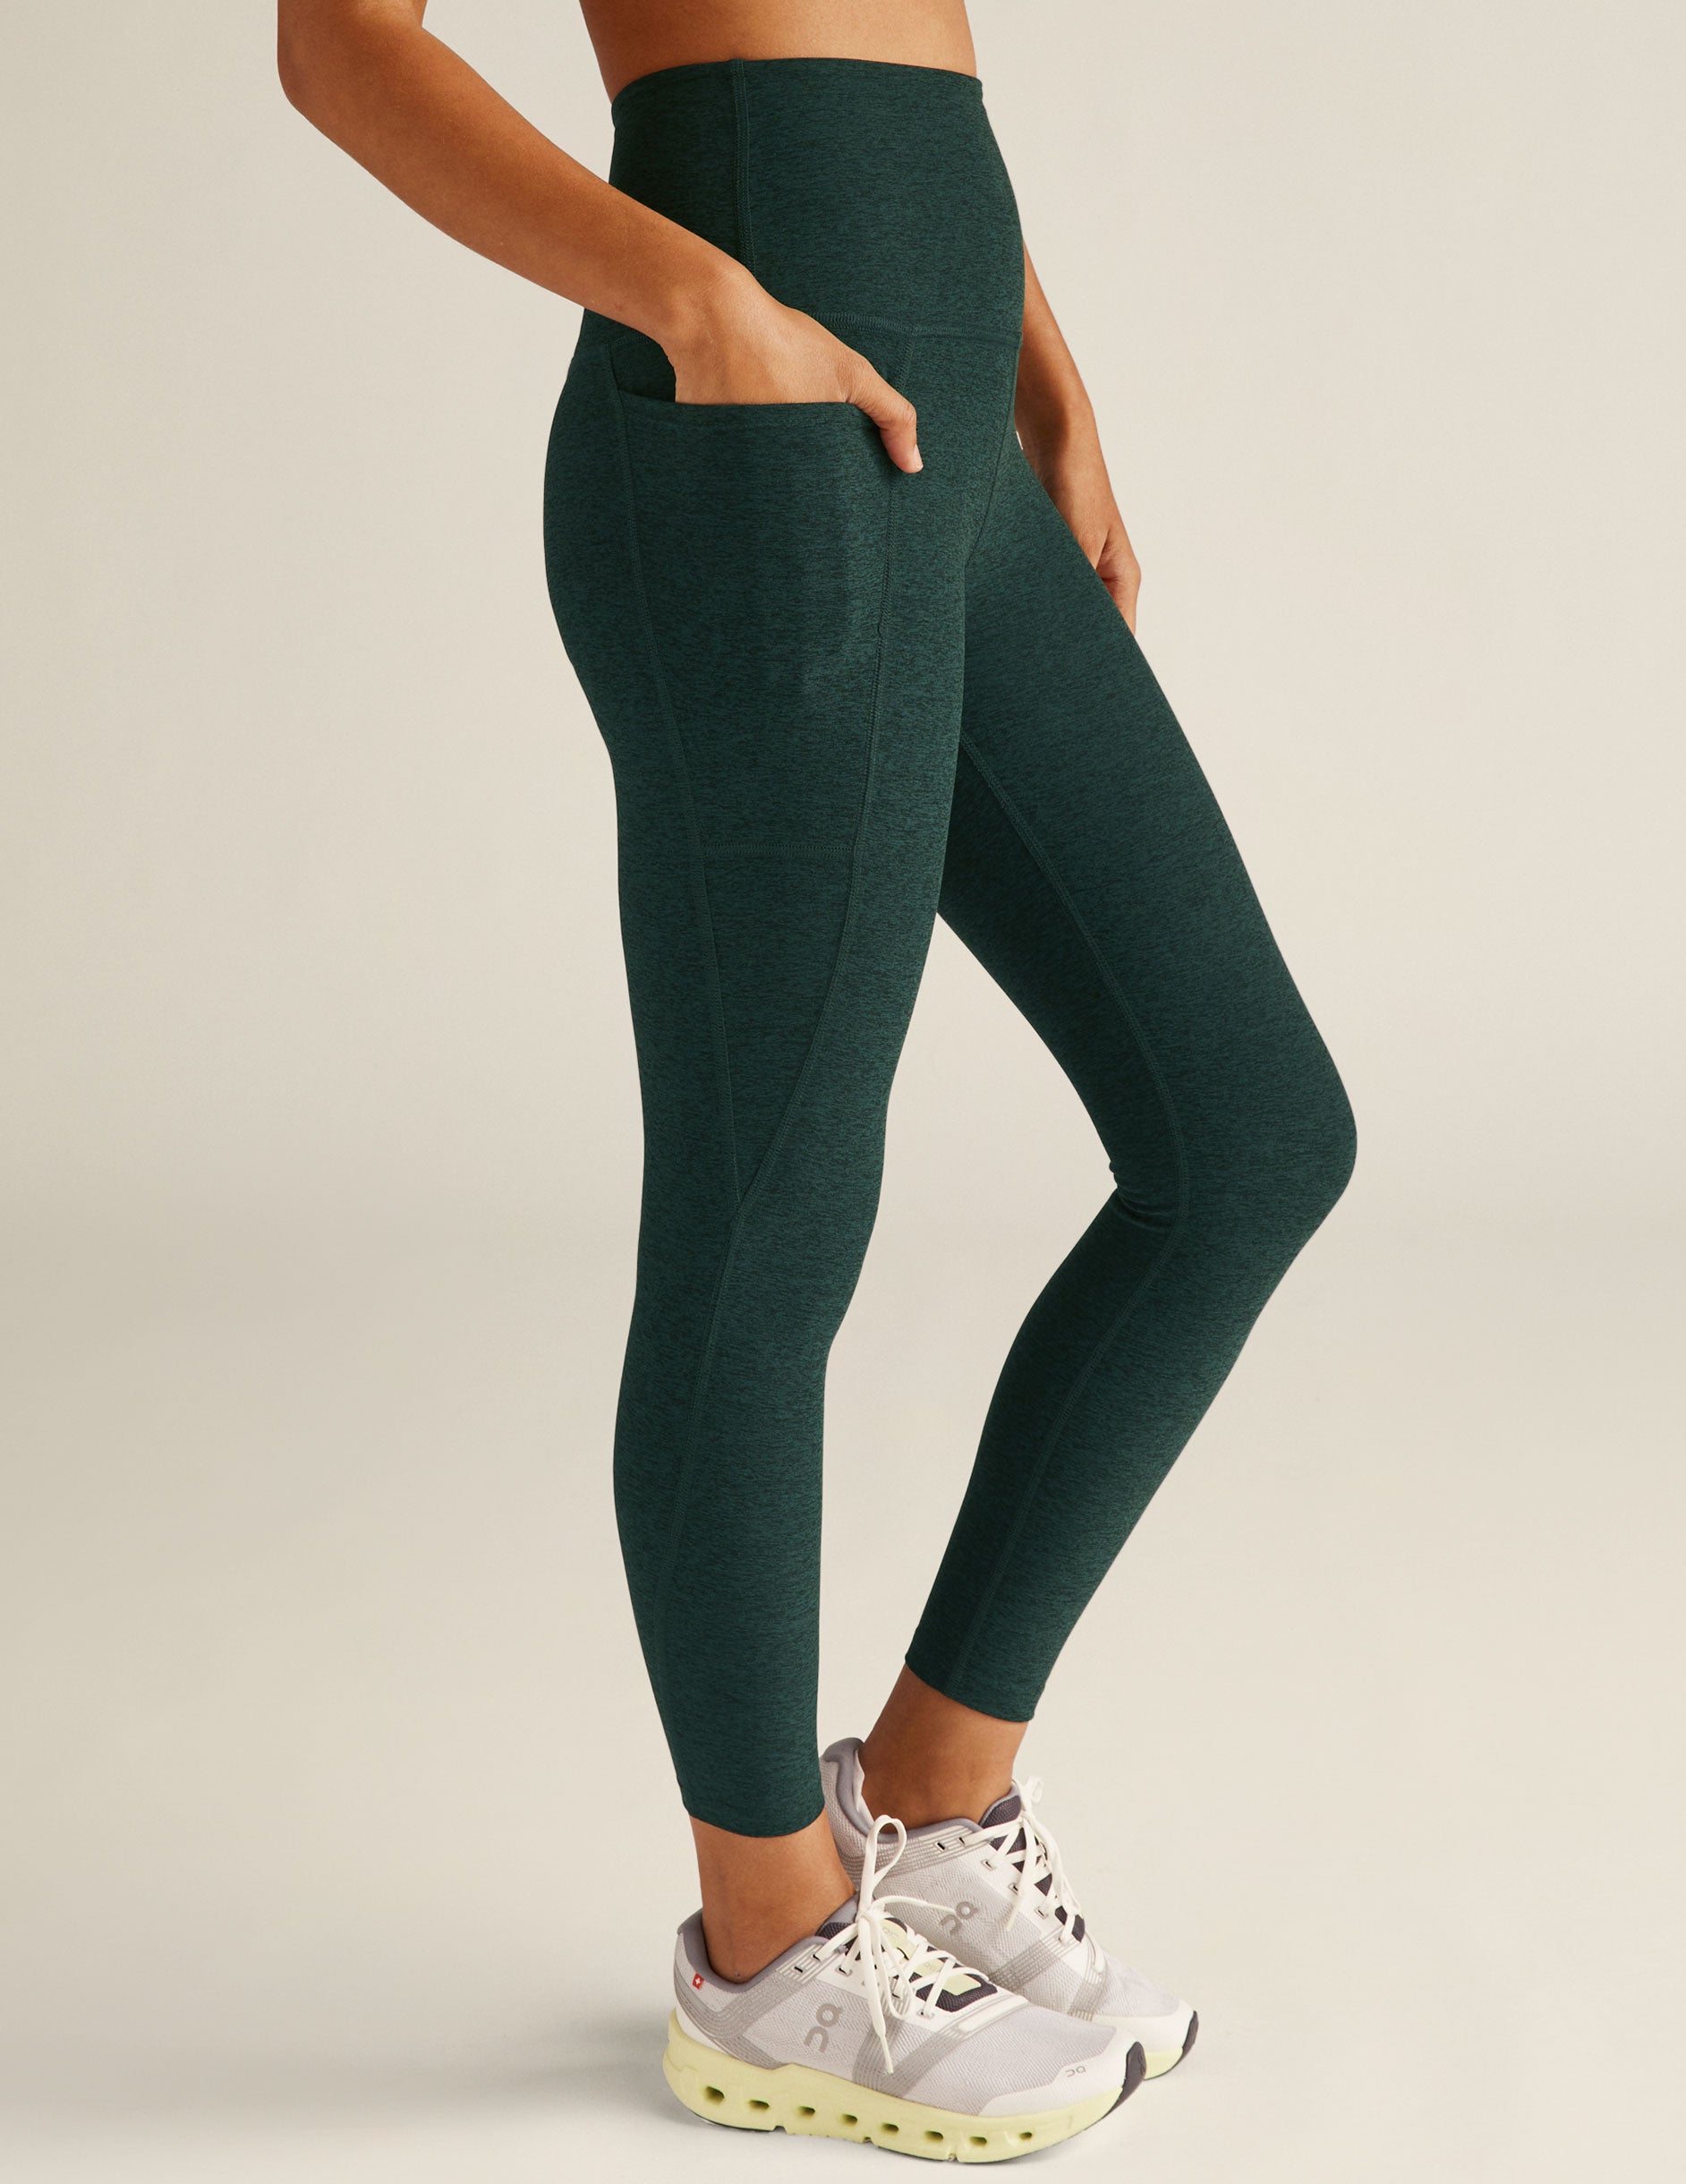 SEEMLY High Waisted Leggings with Pockets